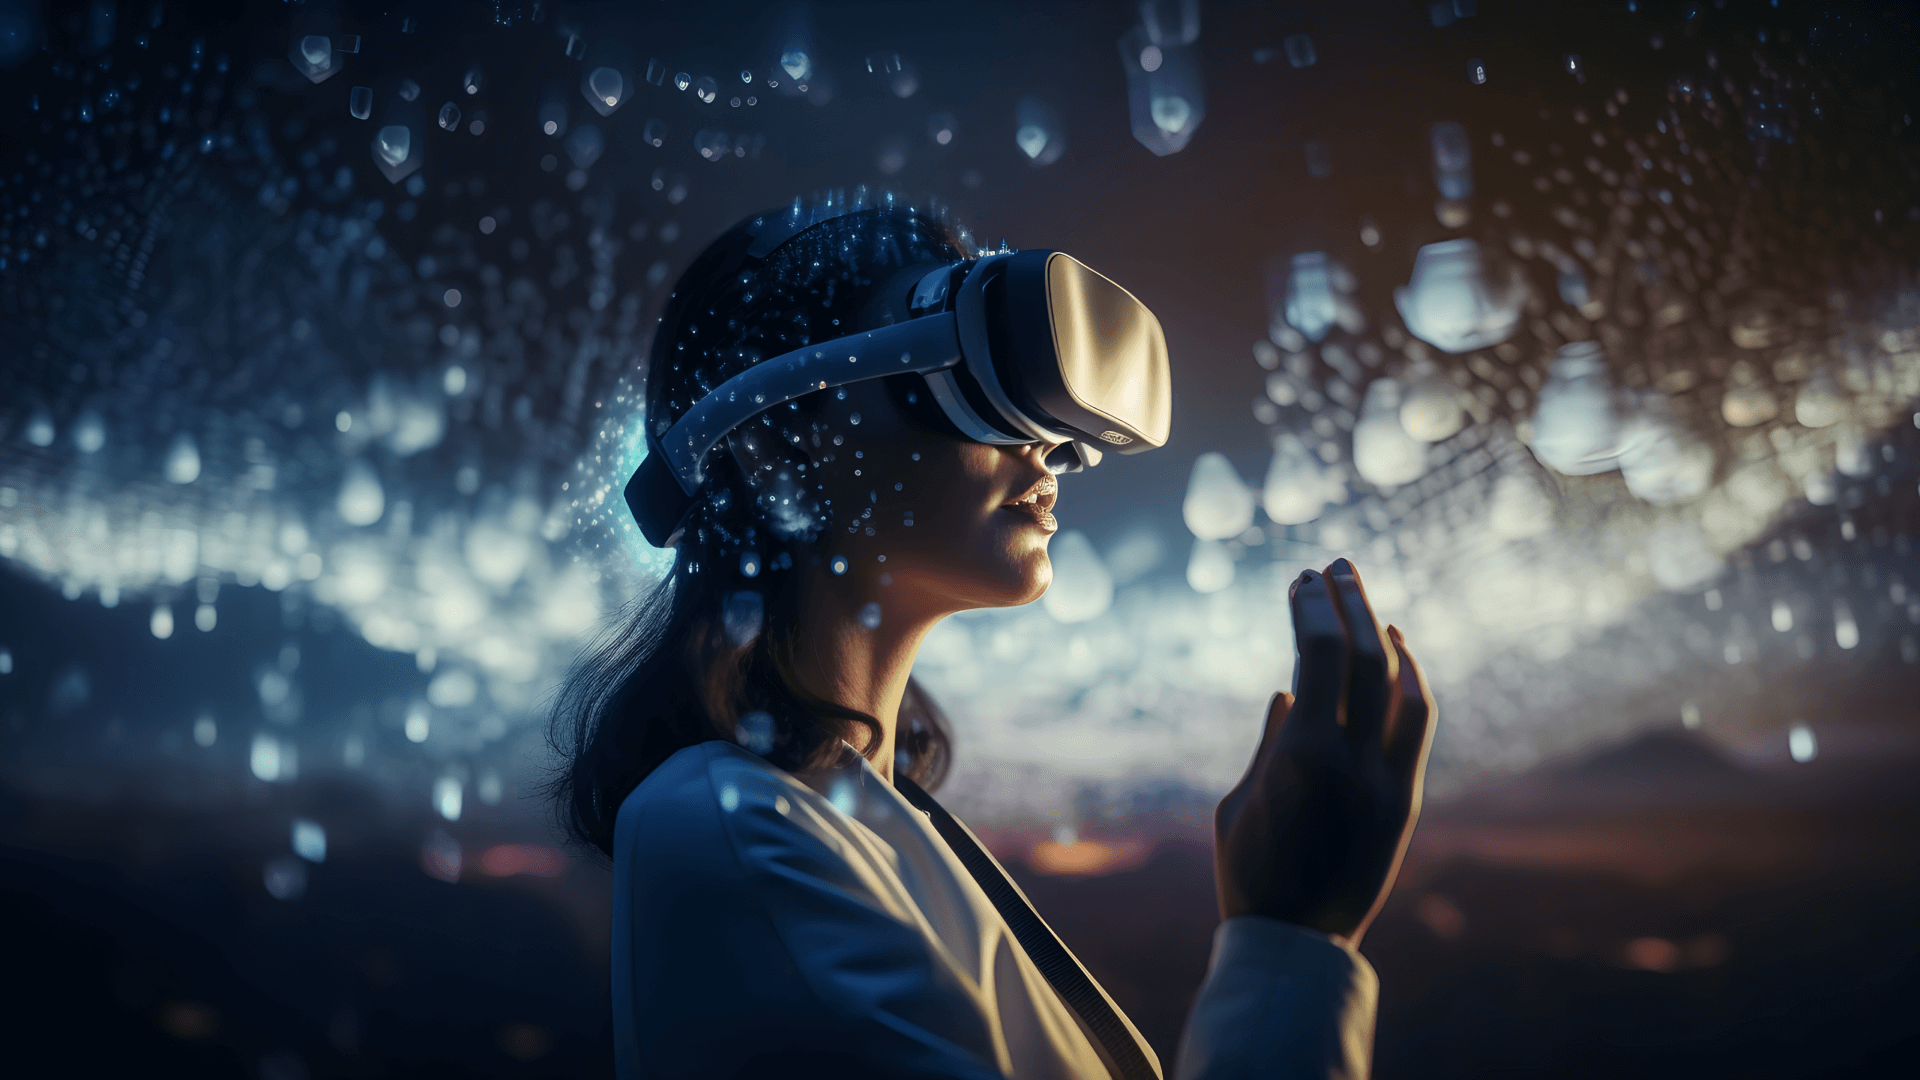 The latest metaverse trends enable businesses to provide their customers with unique immersive experience.